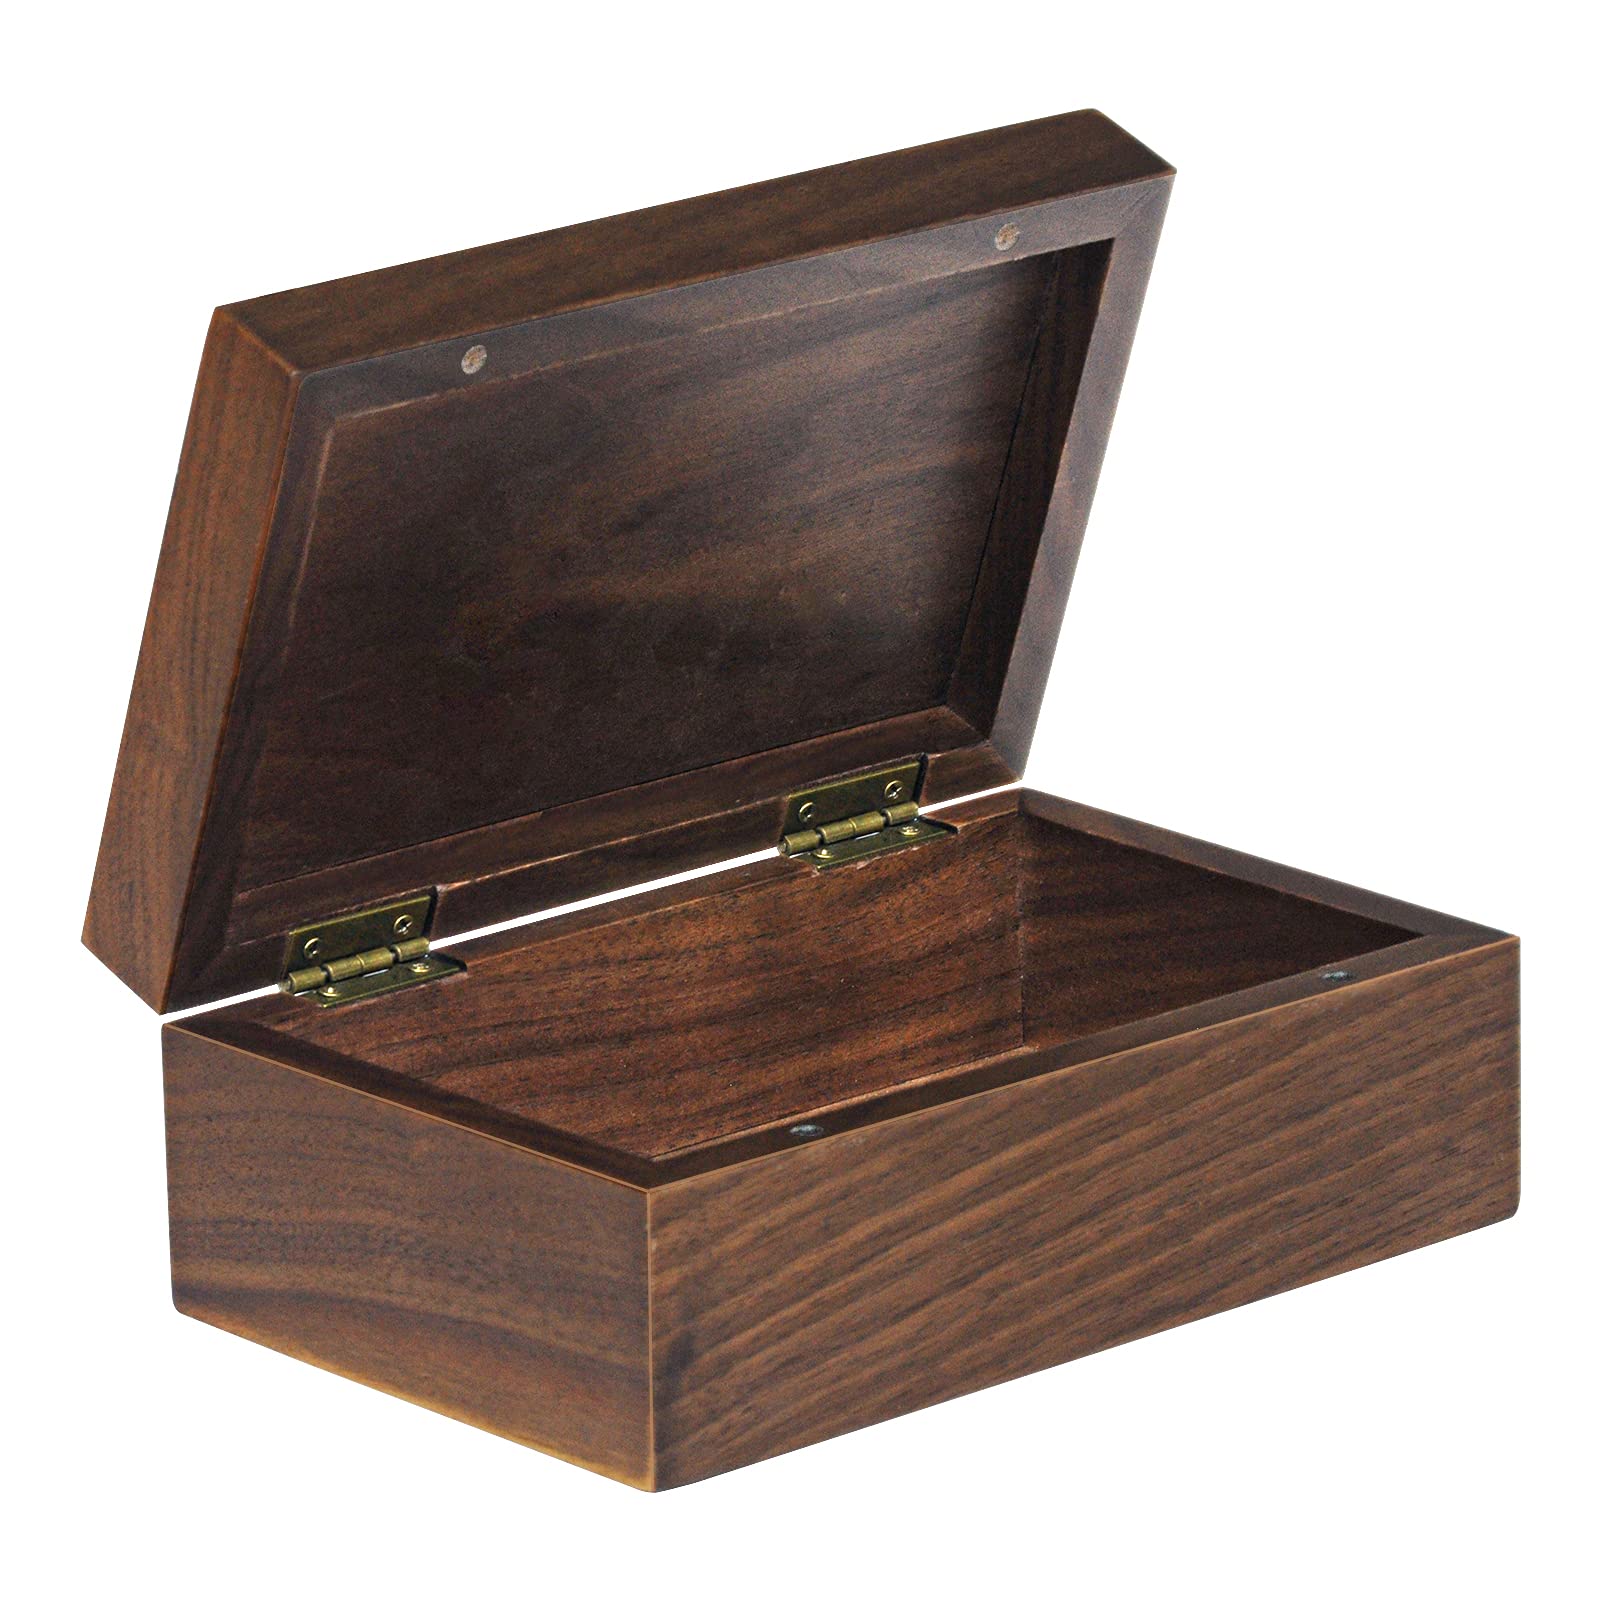 Shangrun  Wooden Box with Hinged Lid